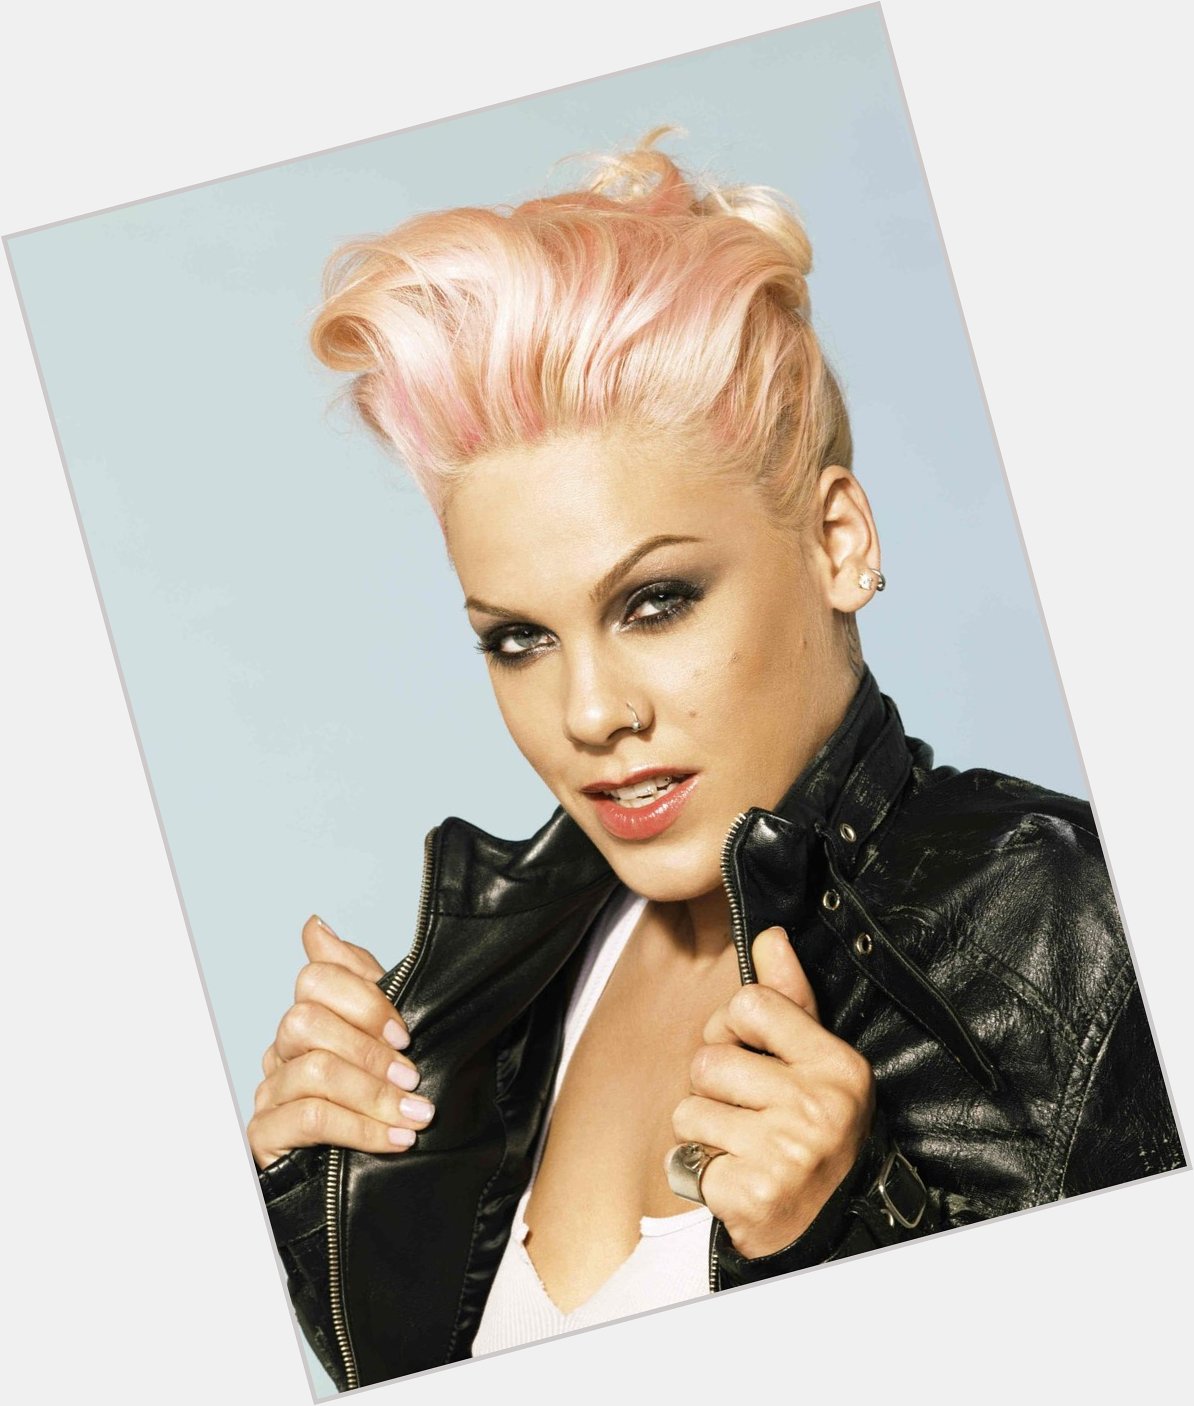 Apparently and share a birthday.

Happy Birthday P!nk!!!!!
You rock ! 